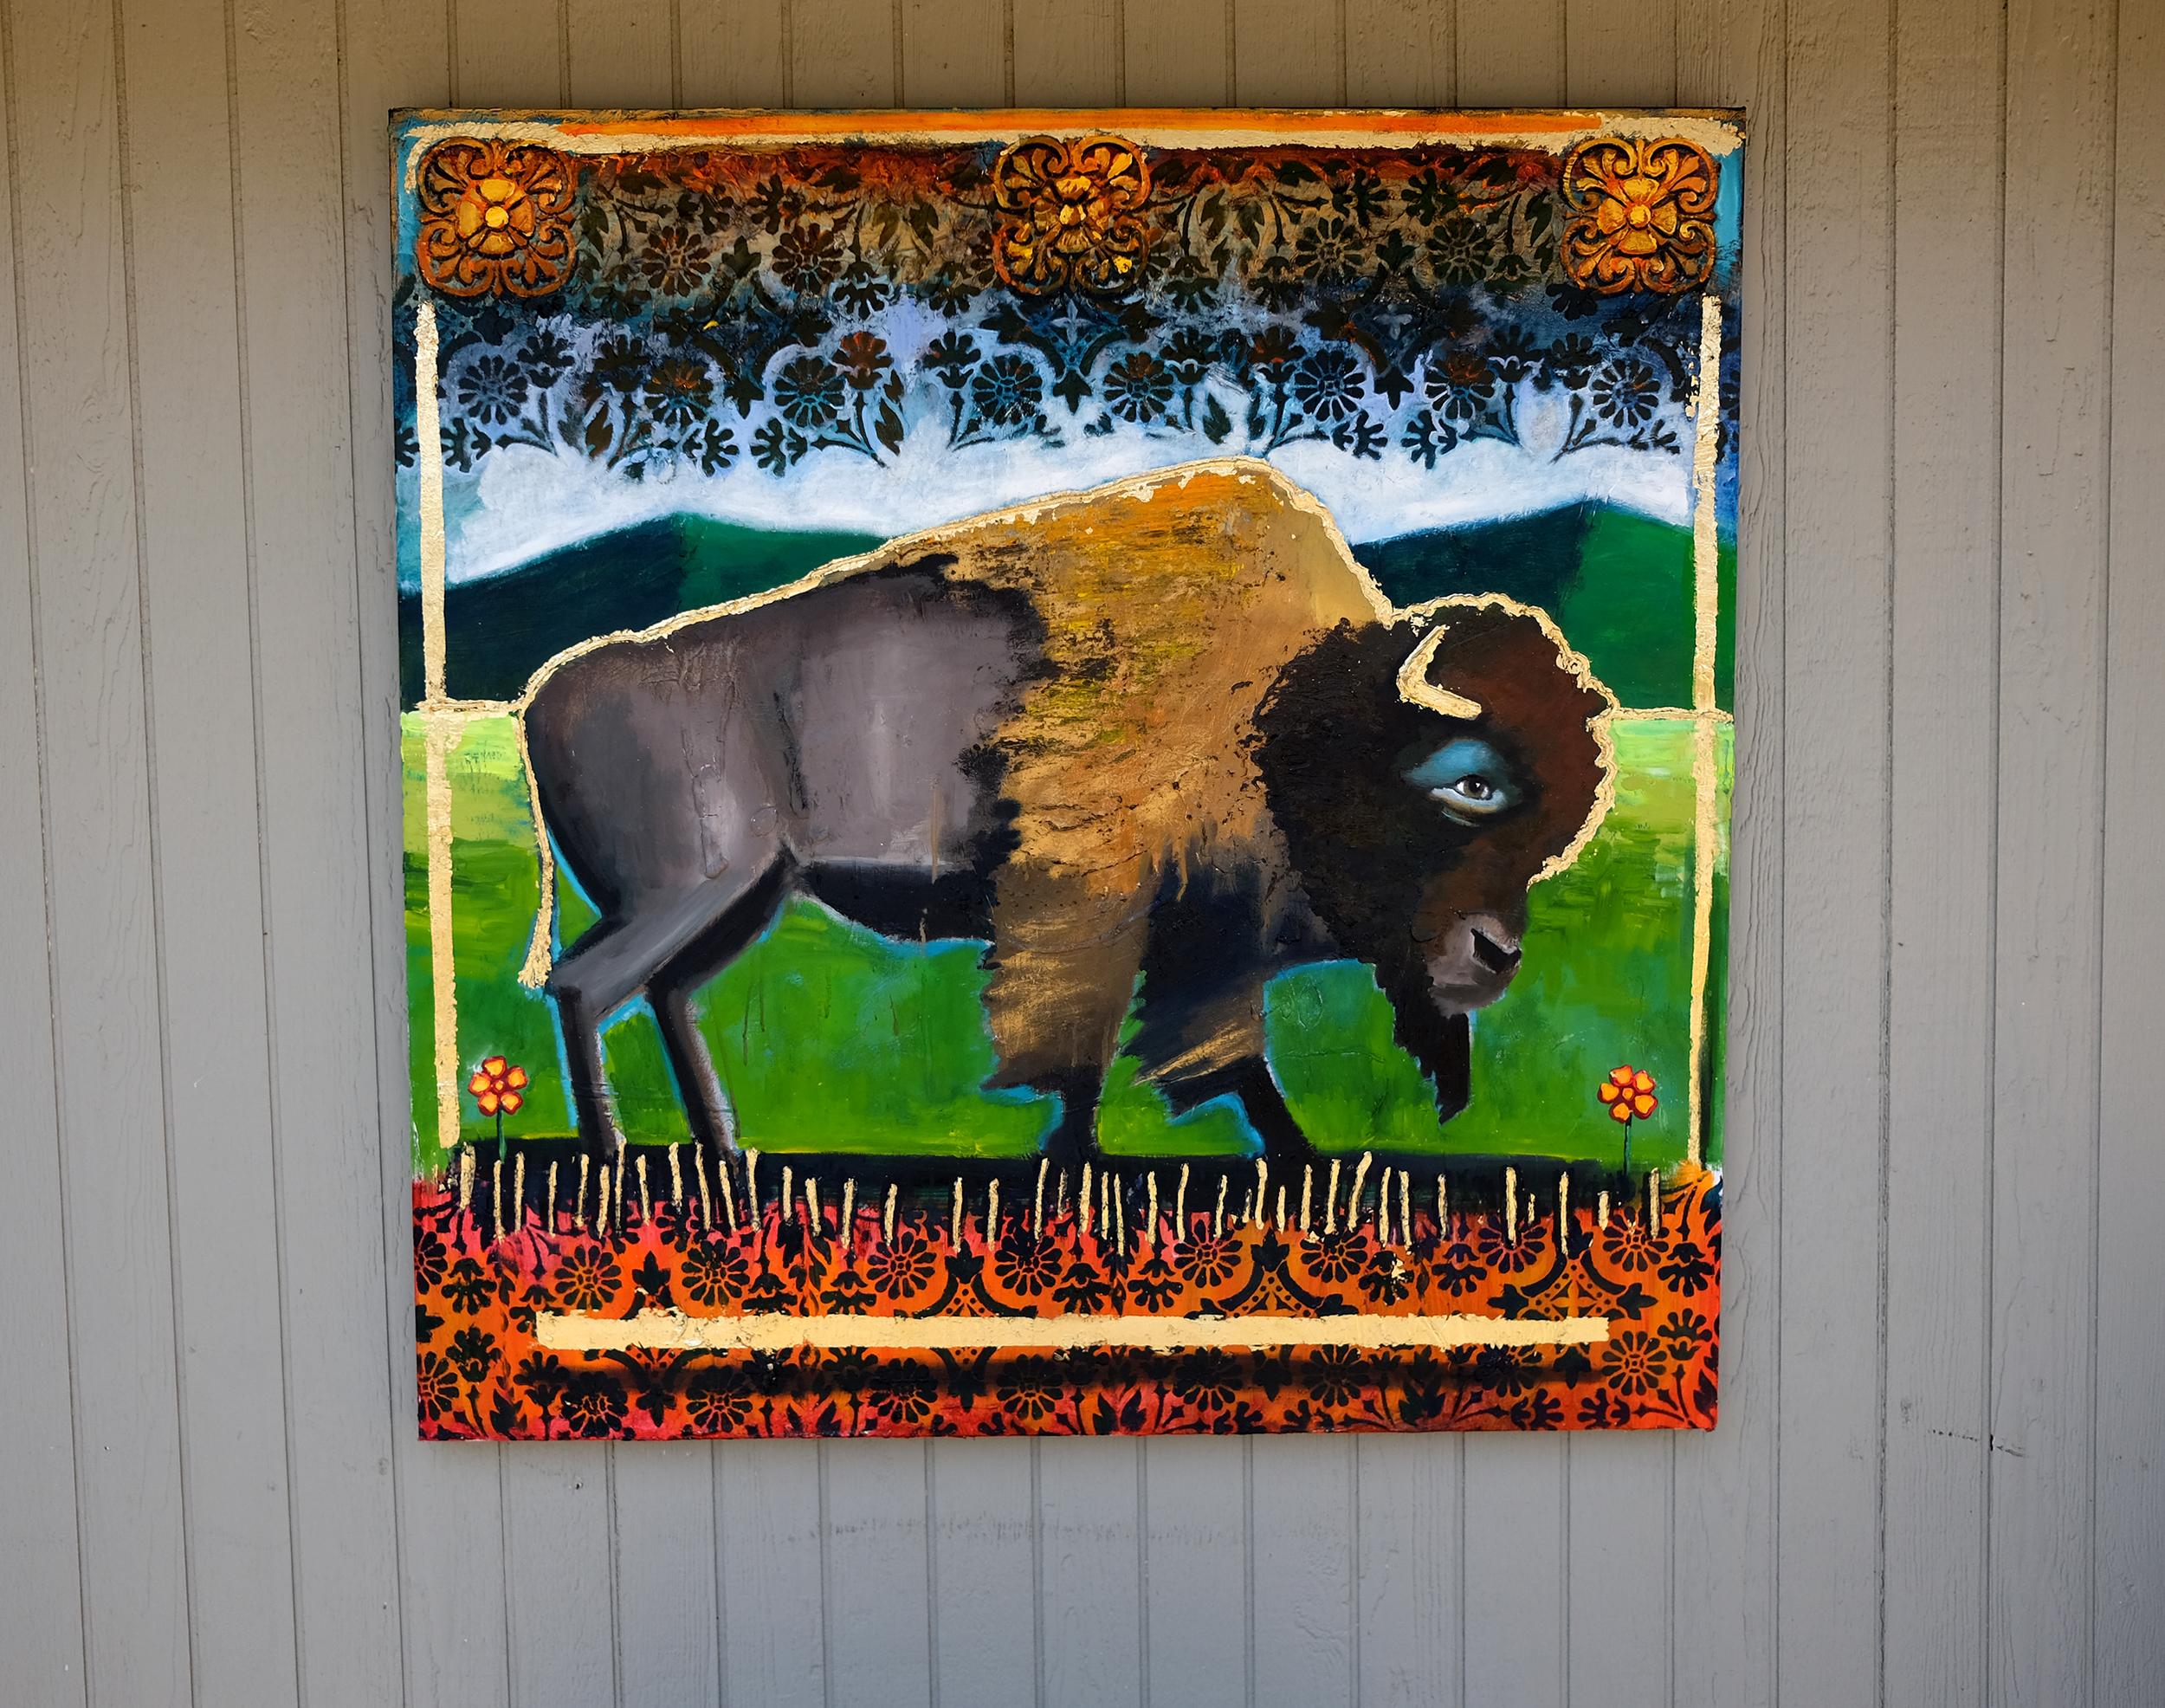 <p>Artist Comments<br>Part of the artist Scott Dykema's series of works with the American Bison as the subject matter. He depicts the hefty animal standing firm in a verdant landscape. 